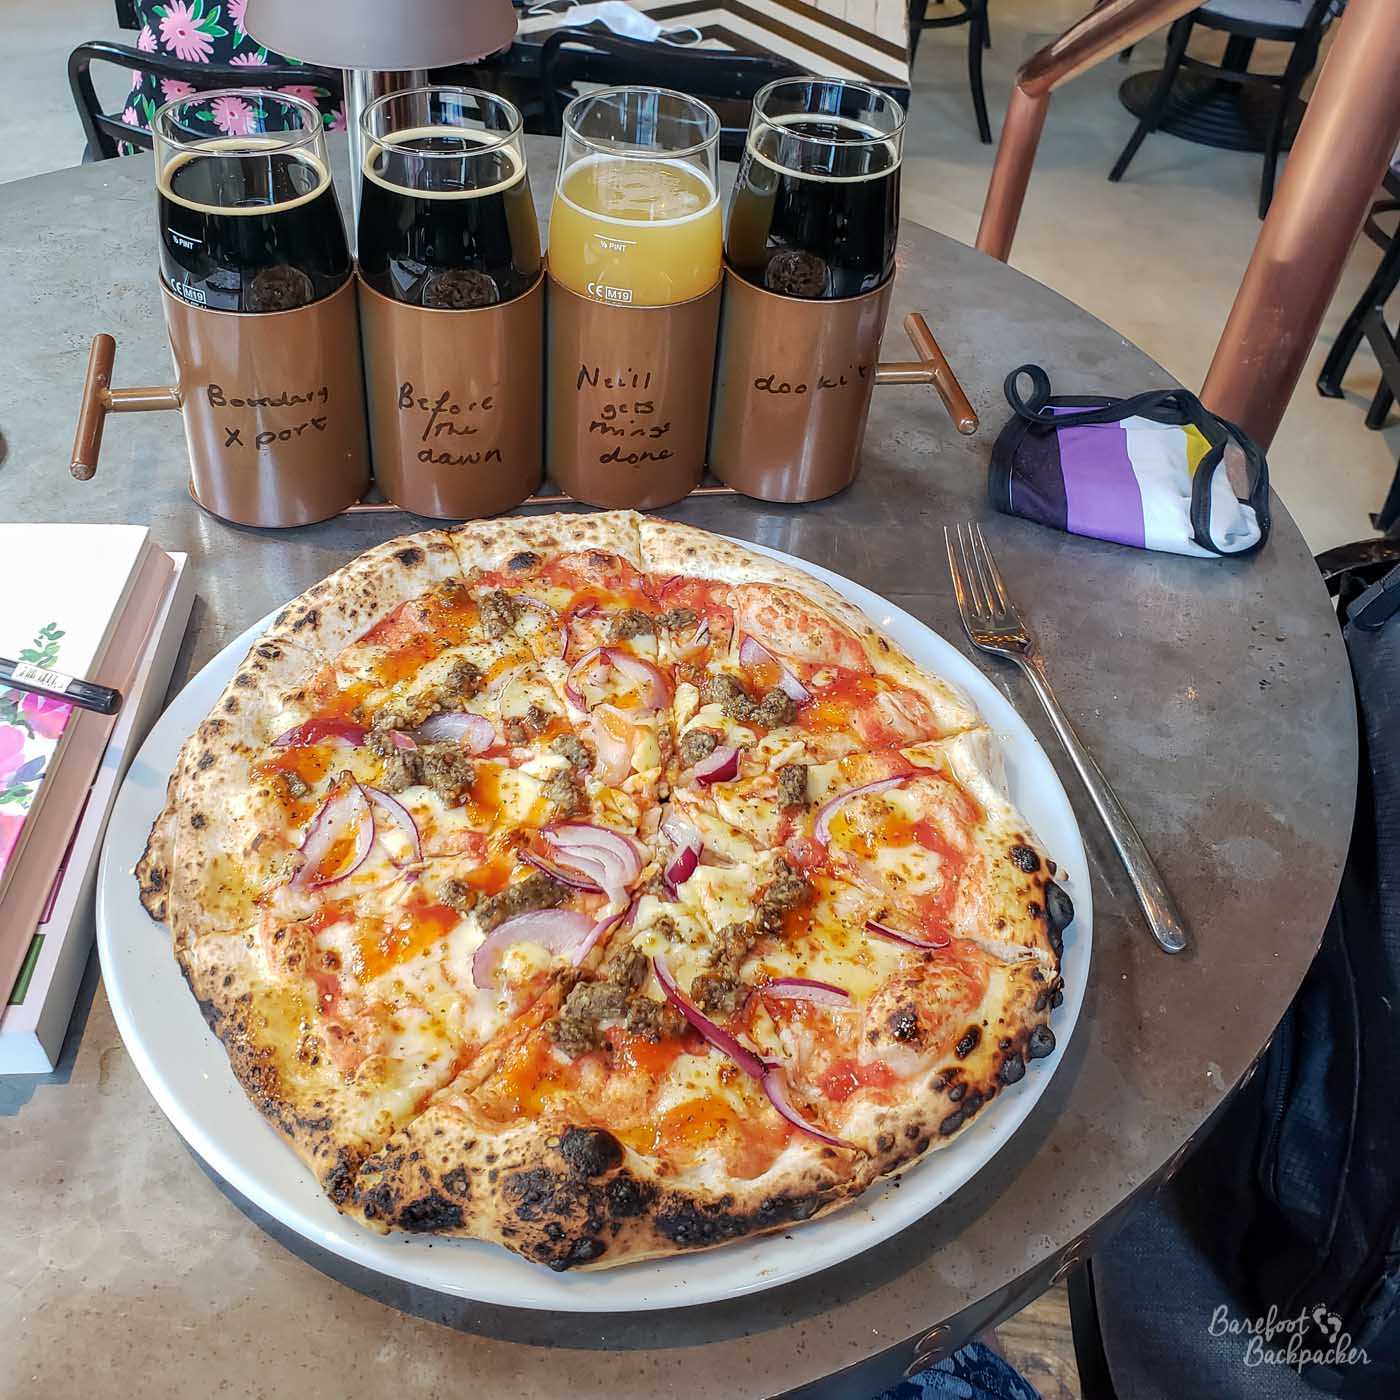 In a pub, on a table. There is a whole circular pizza on a plate, and behind are four small beer glasses in a flight. There are a couple of books just in shot on the left, and a non-binary flag coloured facemask on the right.